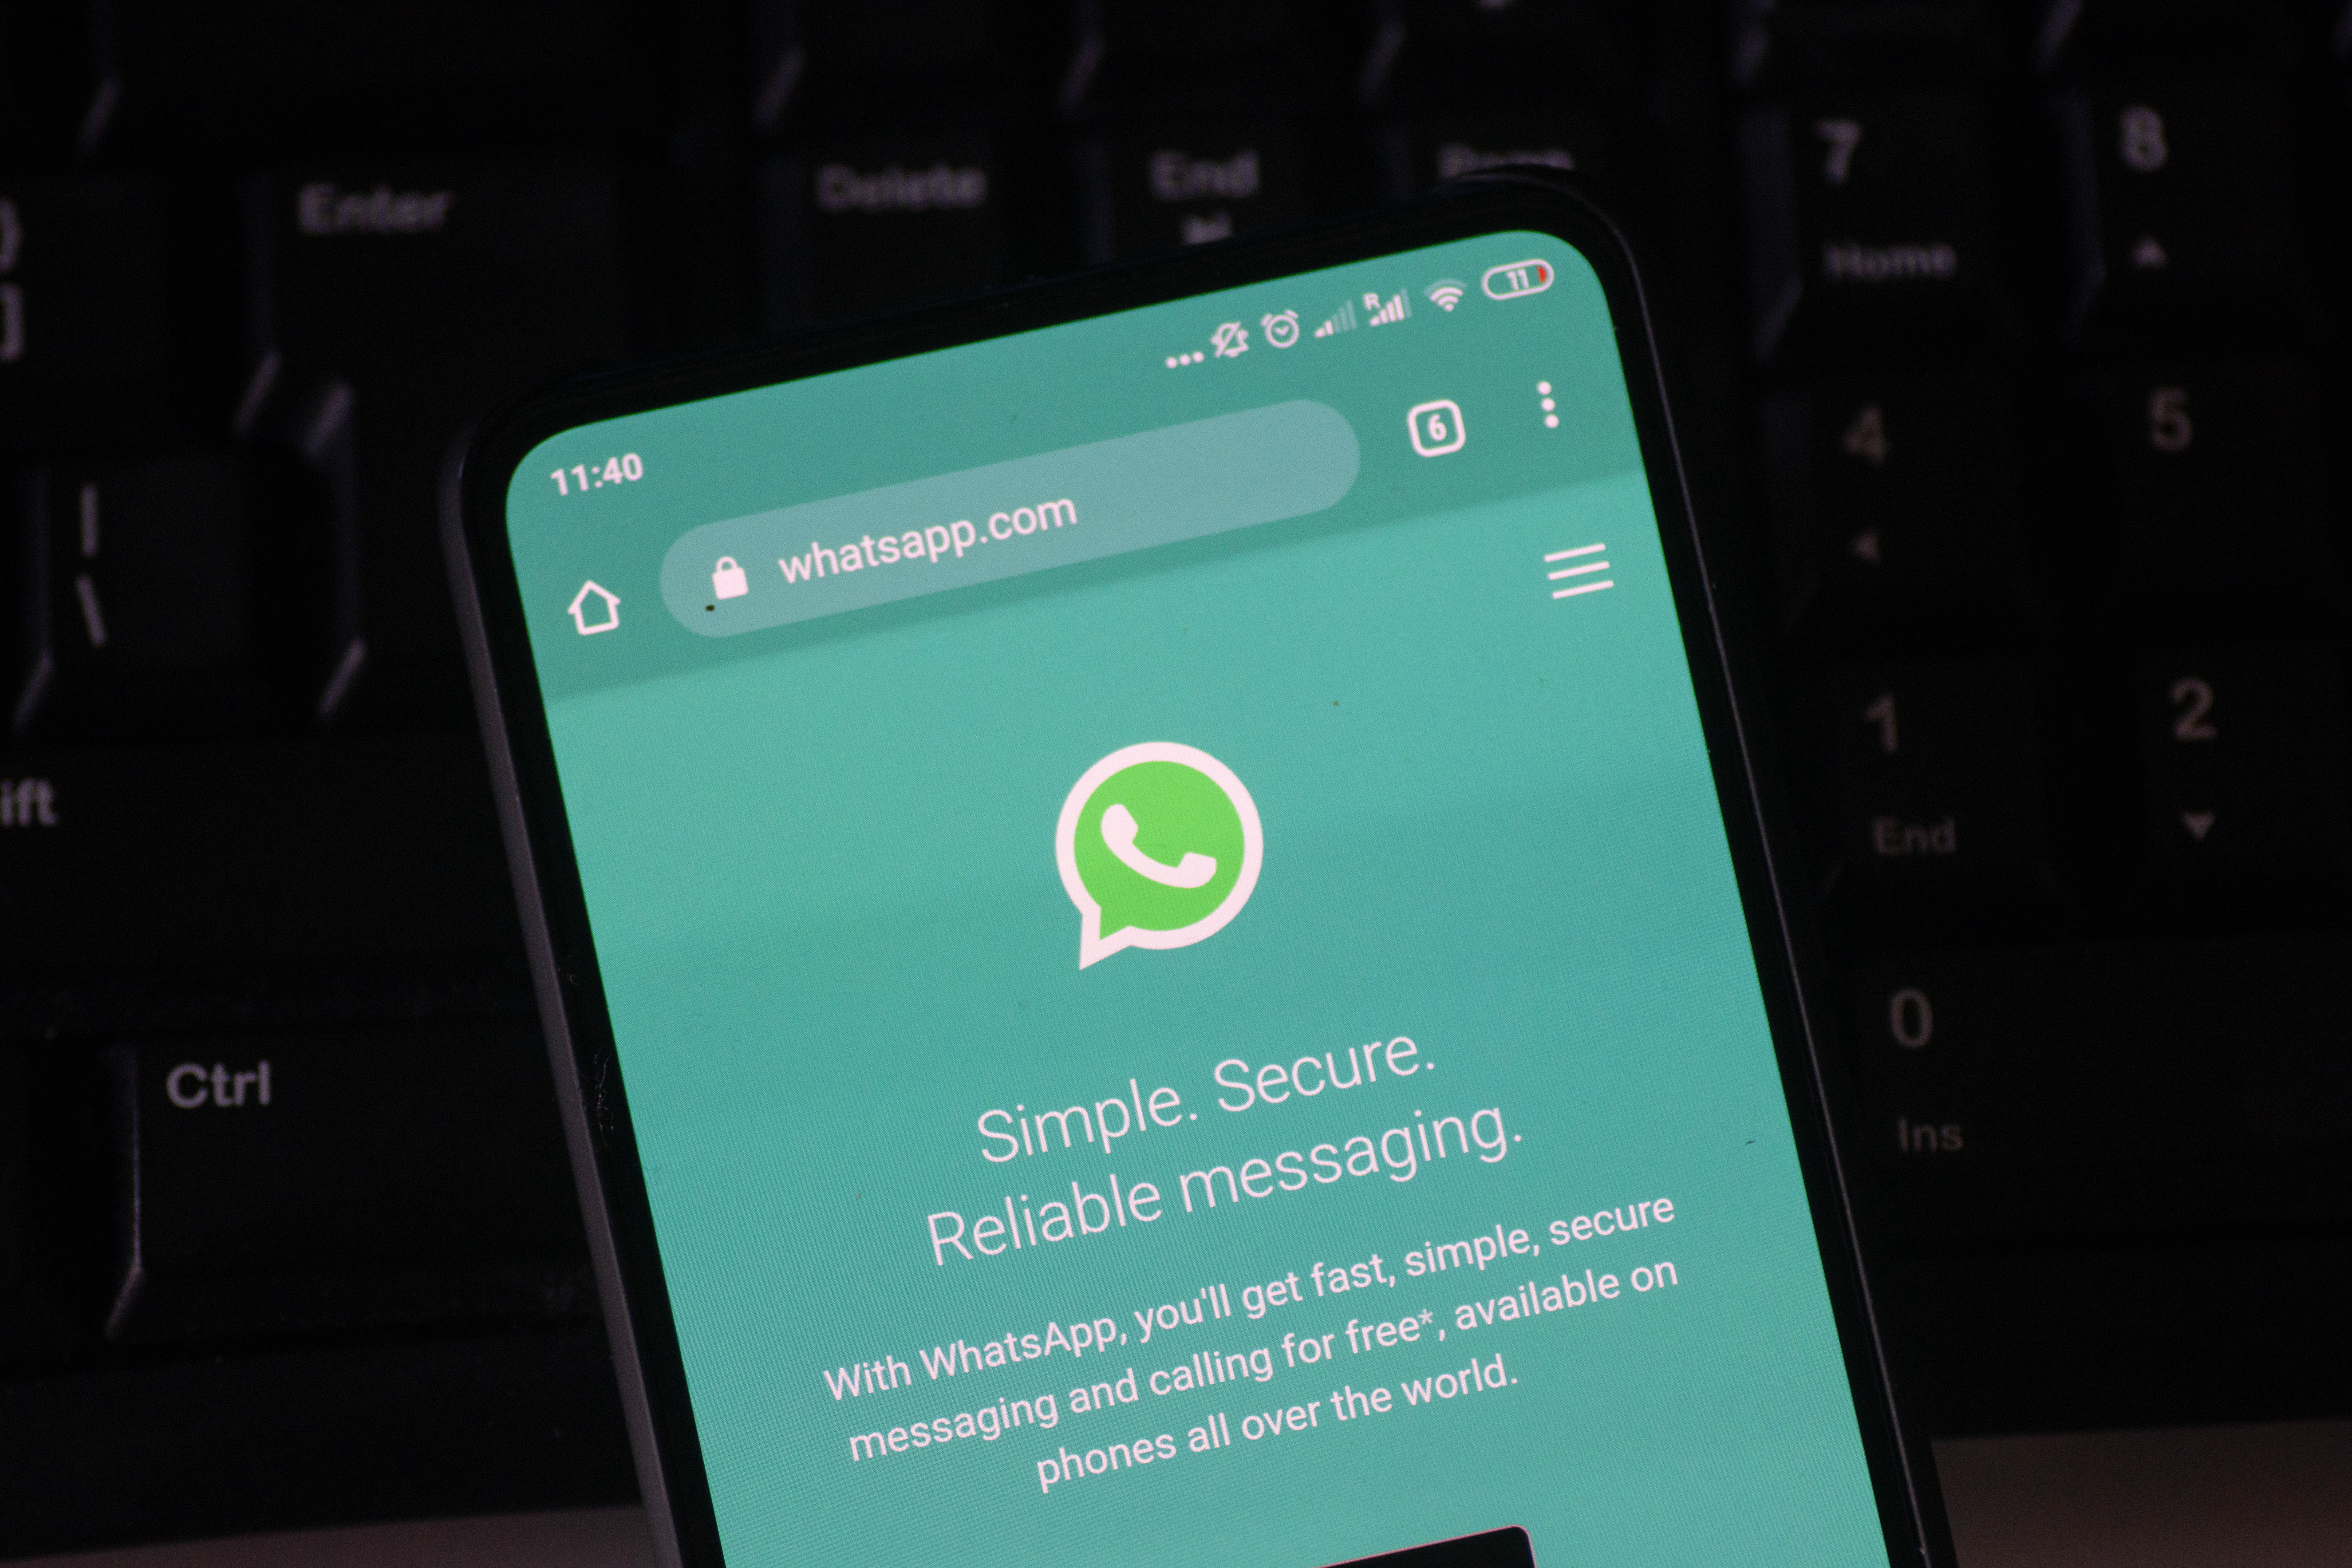 How to hack whatsapp using phone number